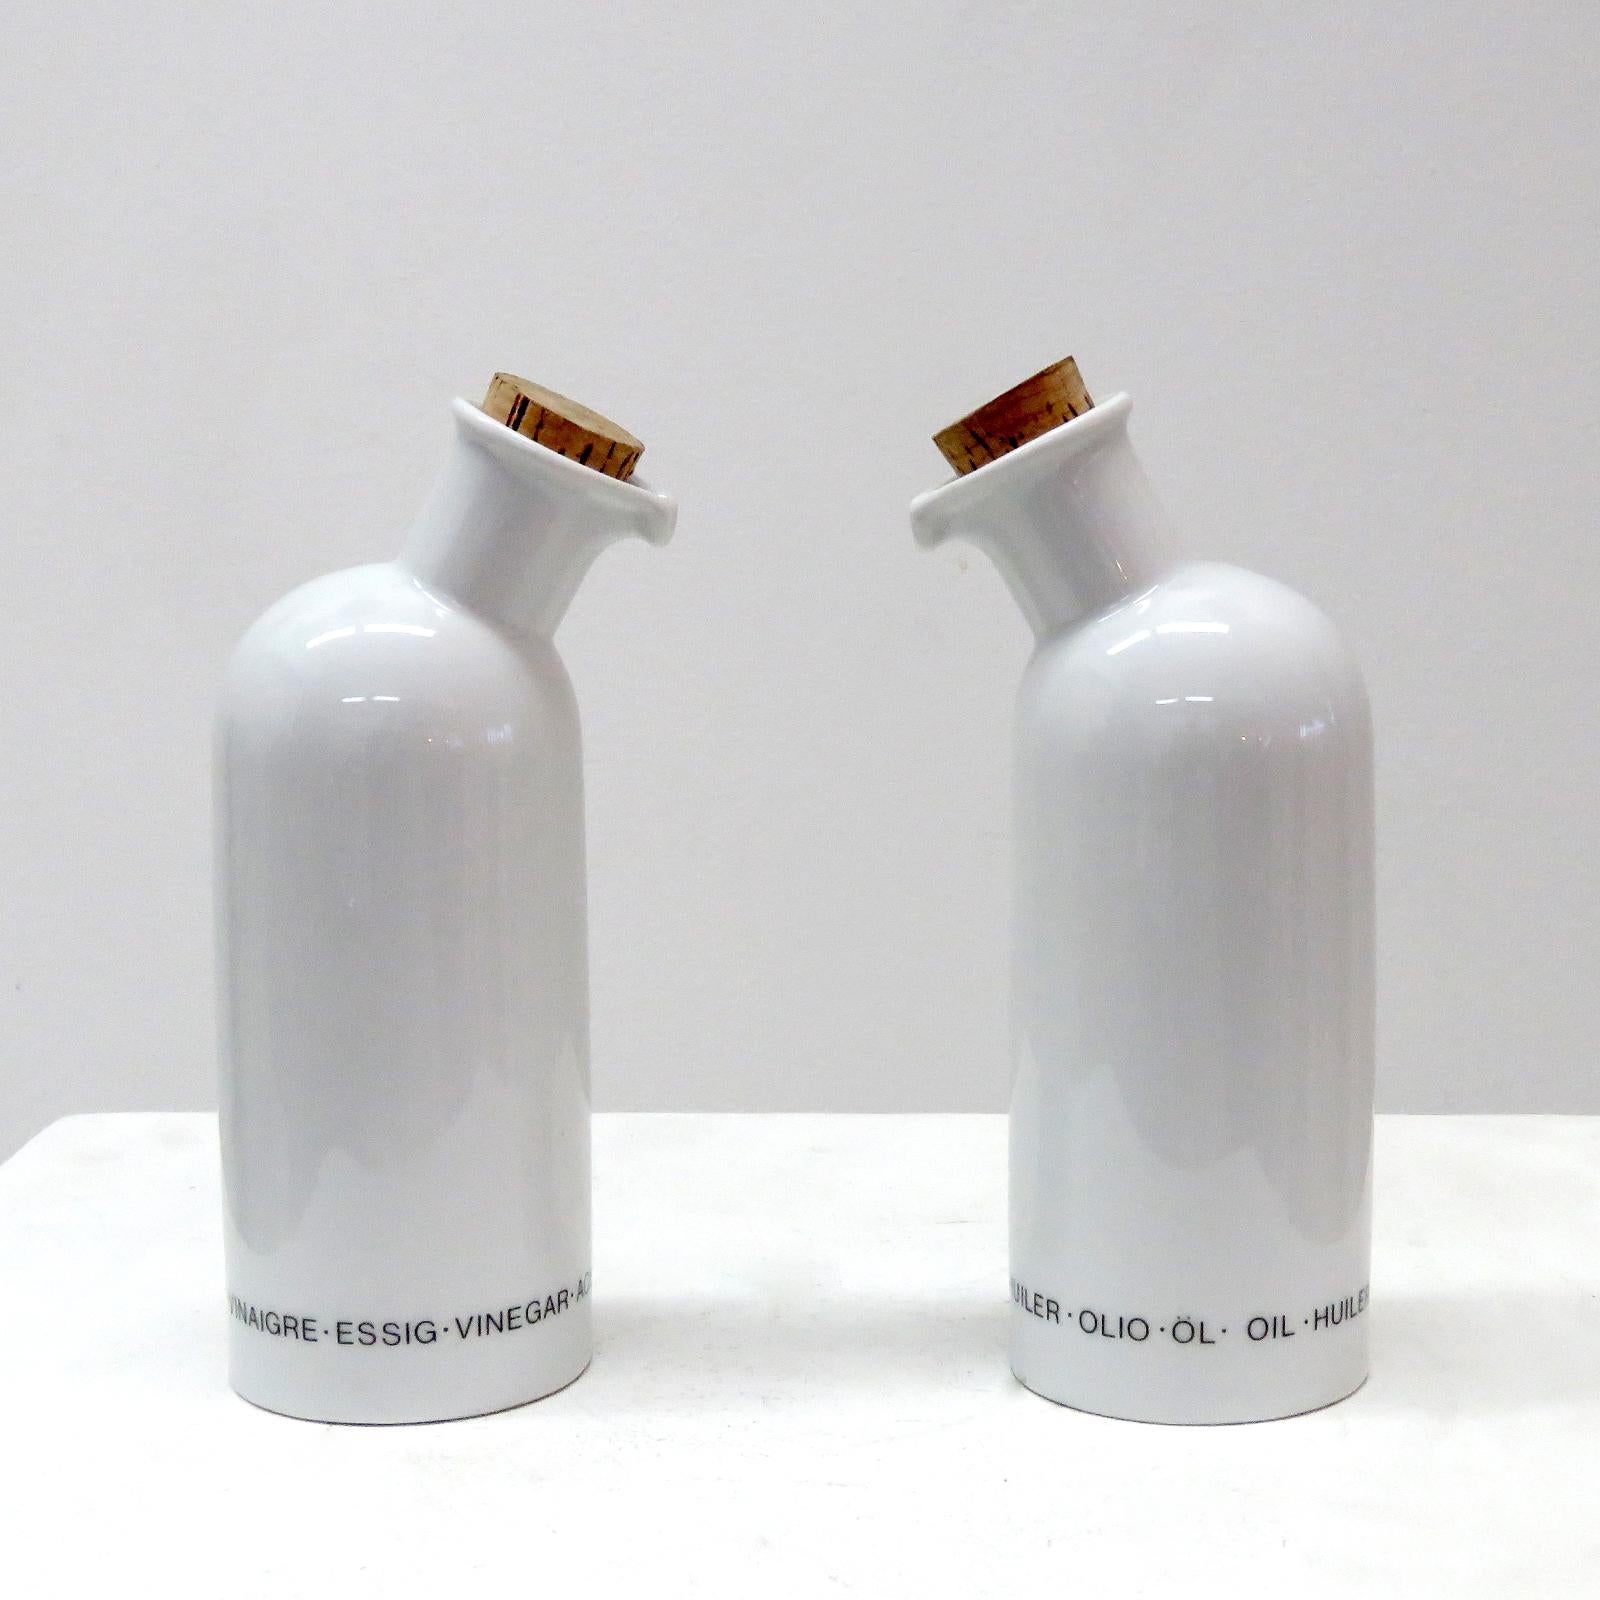 Wonderful white porcelain oil and vinegar serving bottles by Arzberg, Germany, with cork caps, multilingual signage, marked.